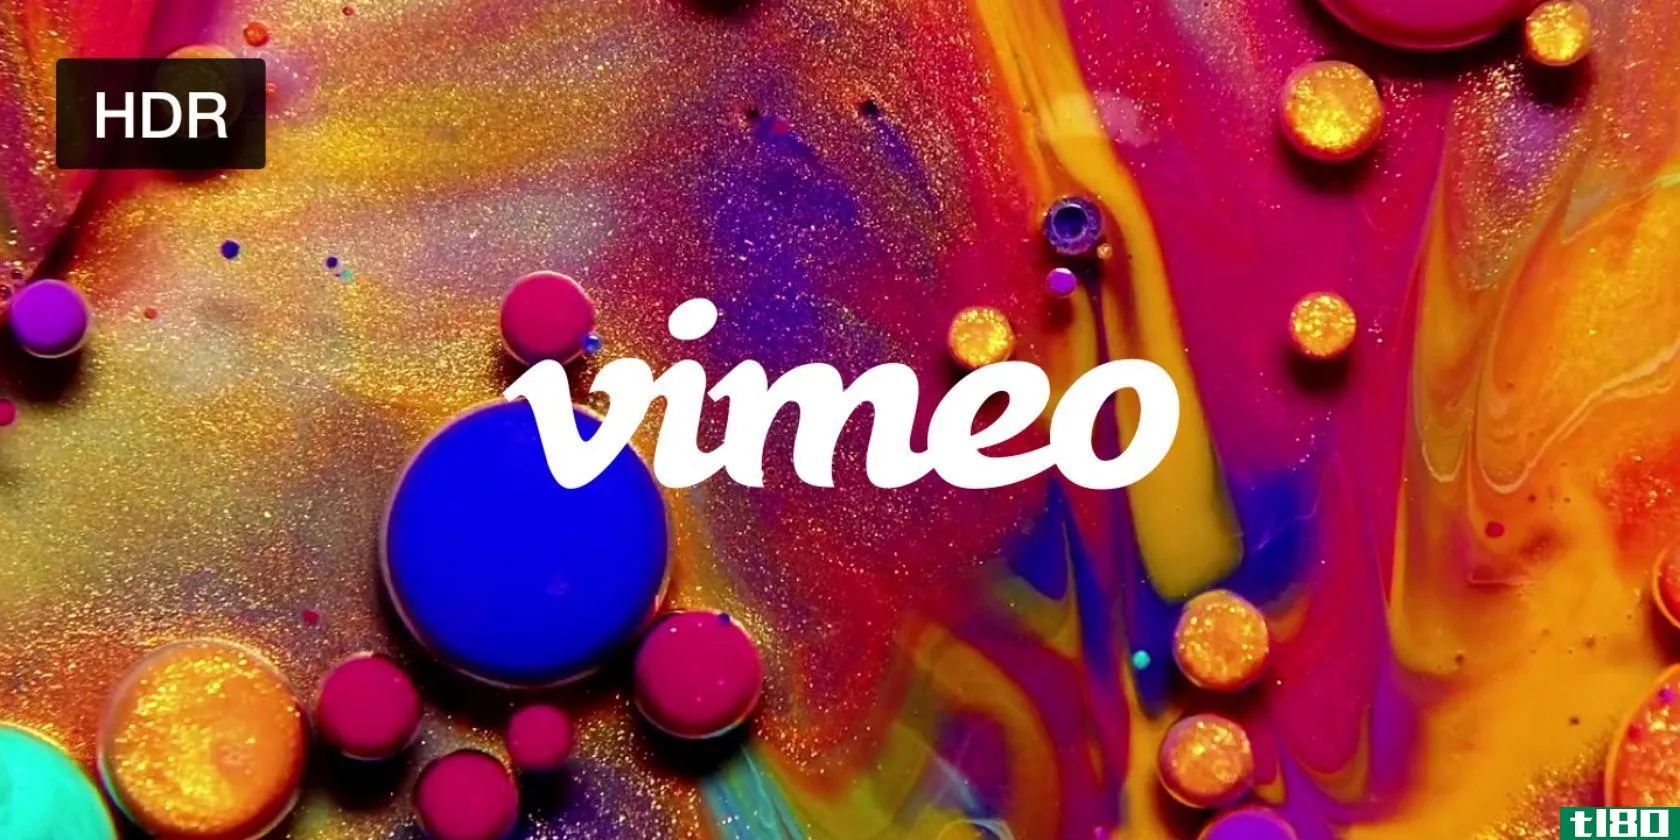 vimeo-hdr-video-example